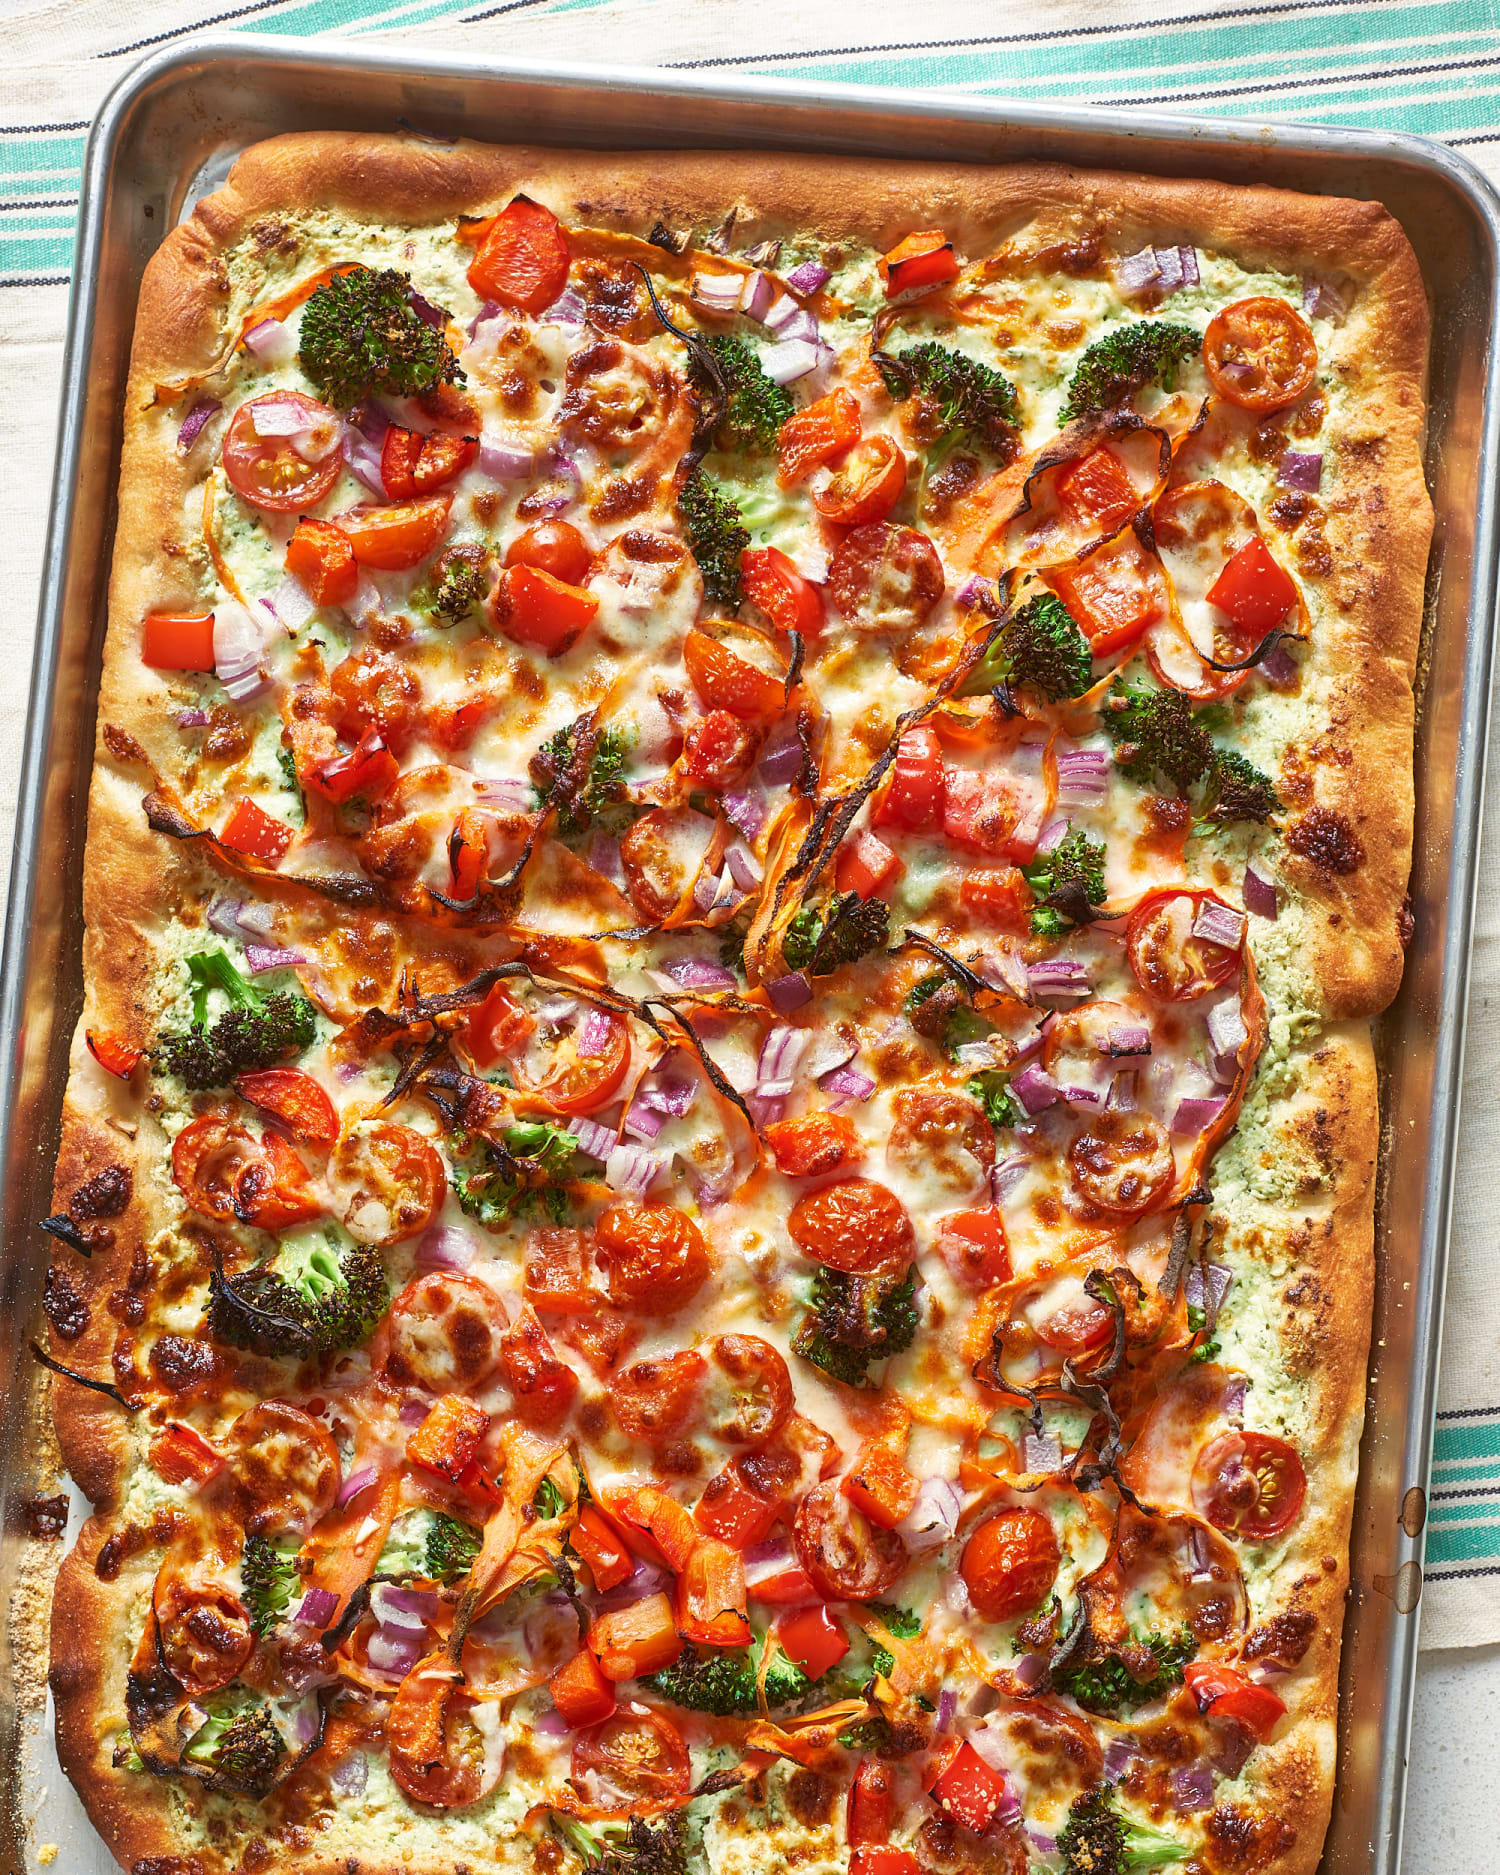 Our Guide to Making the Best Homemade Pizza | Kitchn